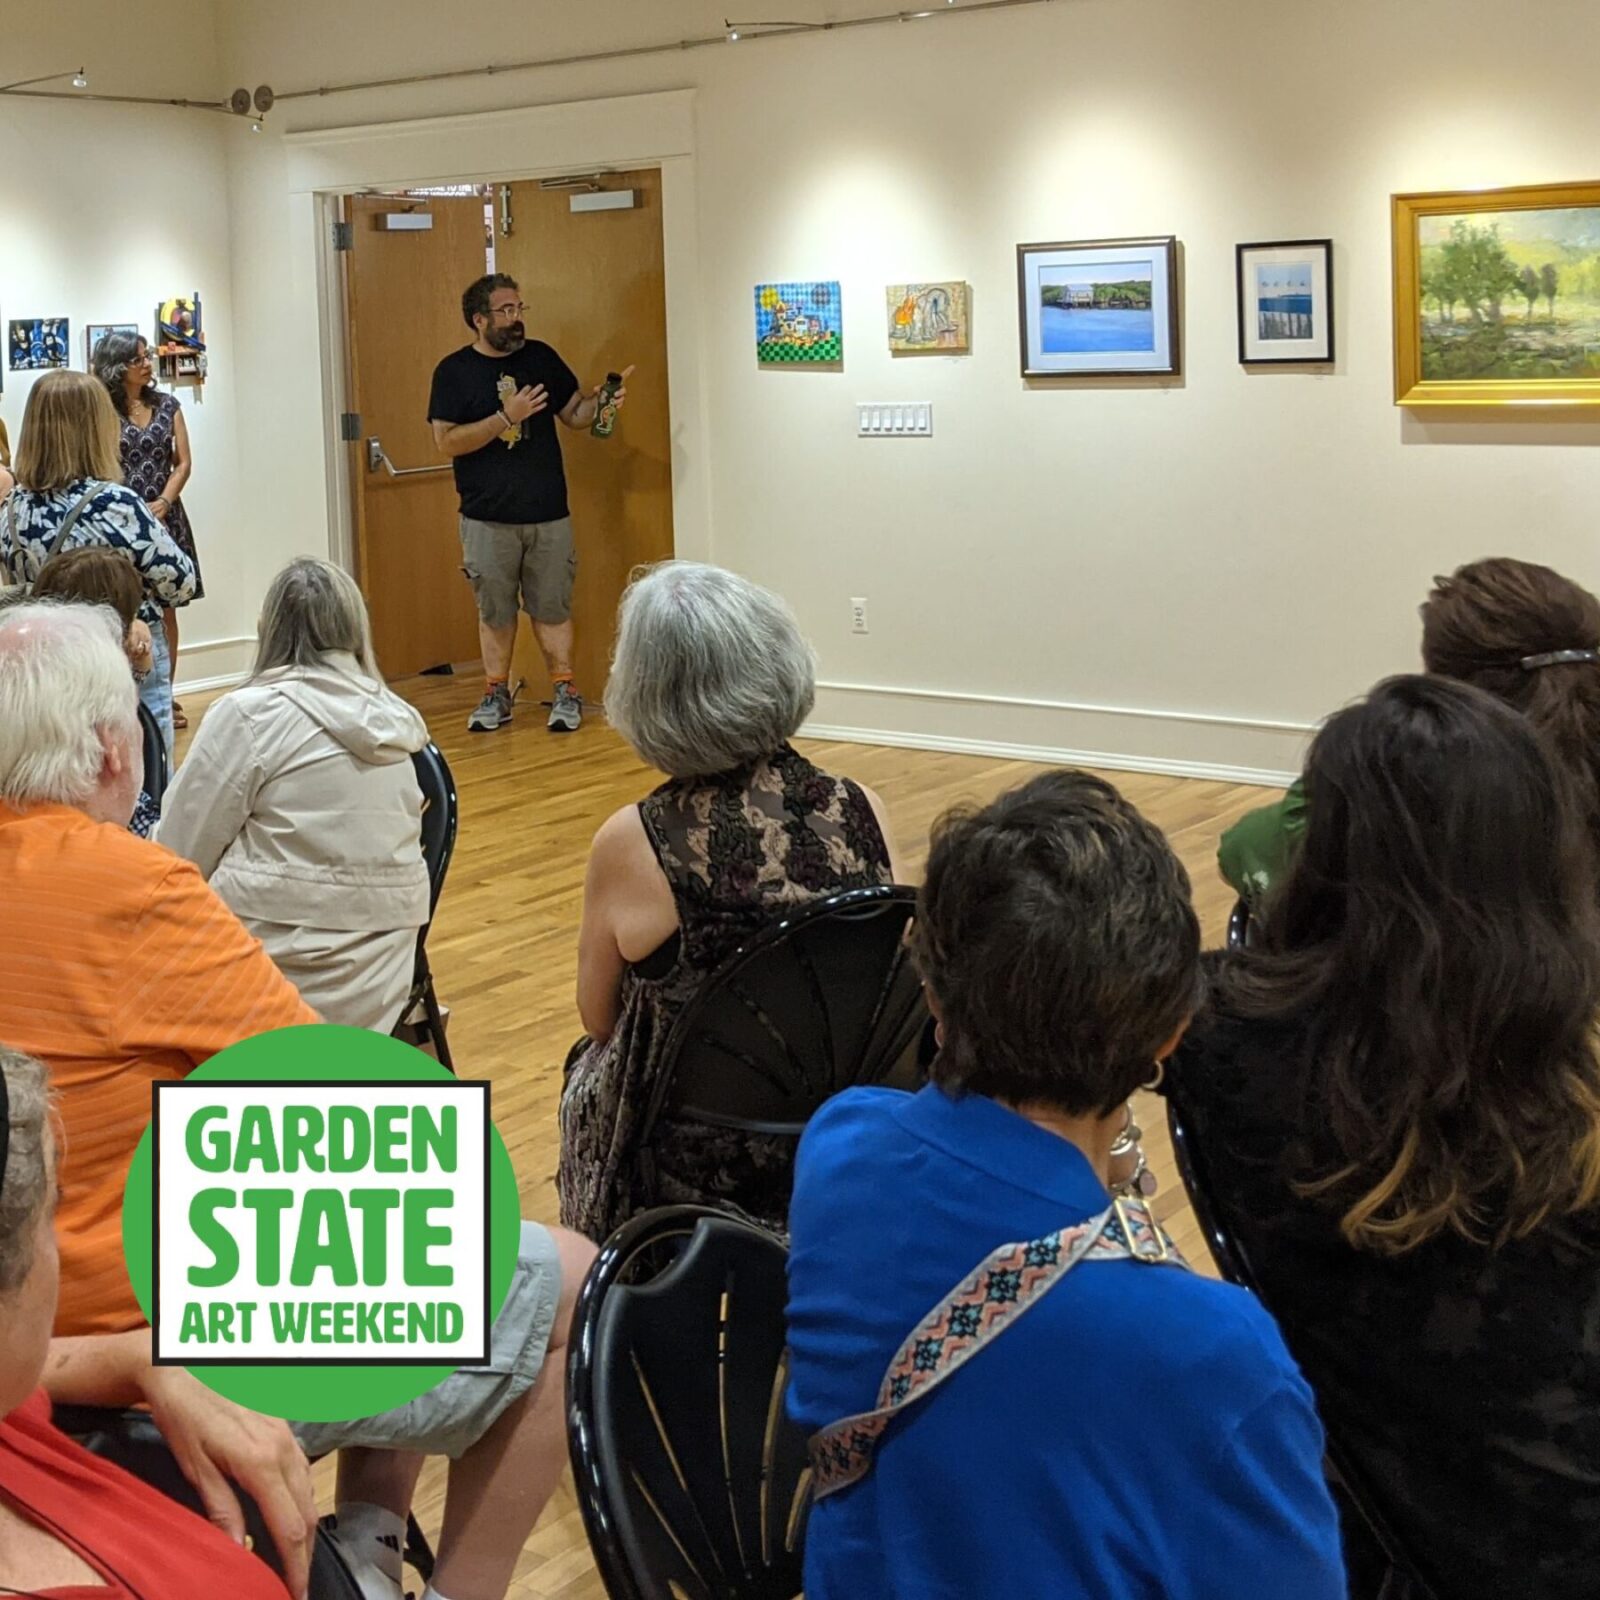 Gallery photo of artist talking to crowd with Garden State Art Weekend Logo